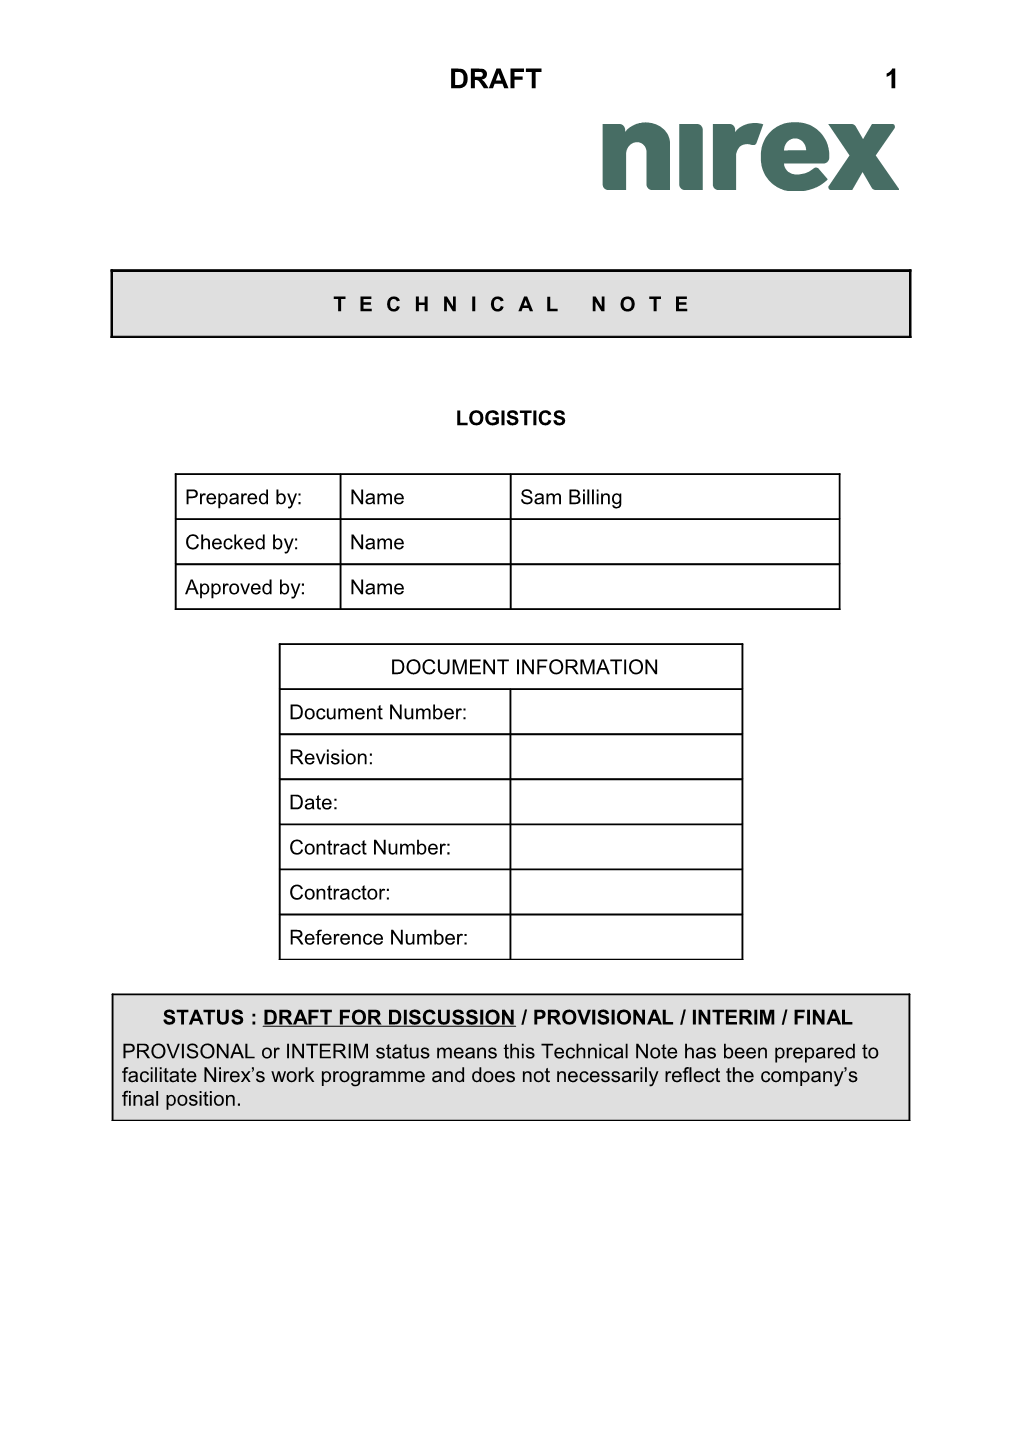 This Document Demonstrates the Logistics of the Integration of Inspection Cell and Overpacking